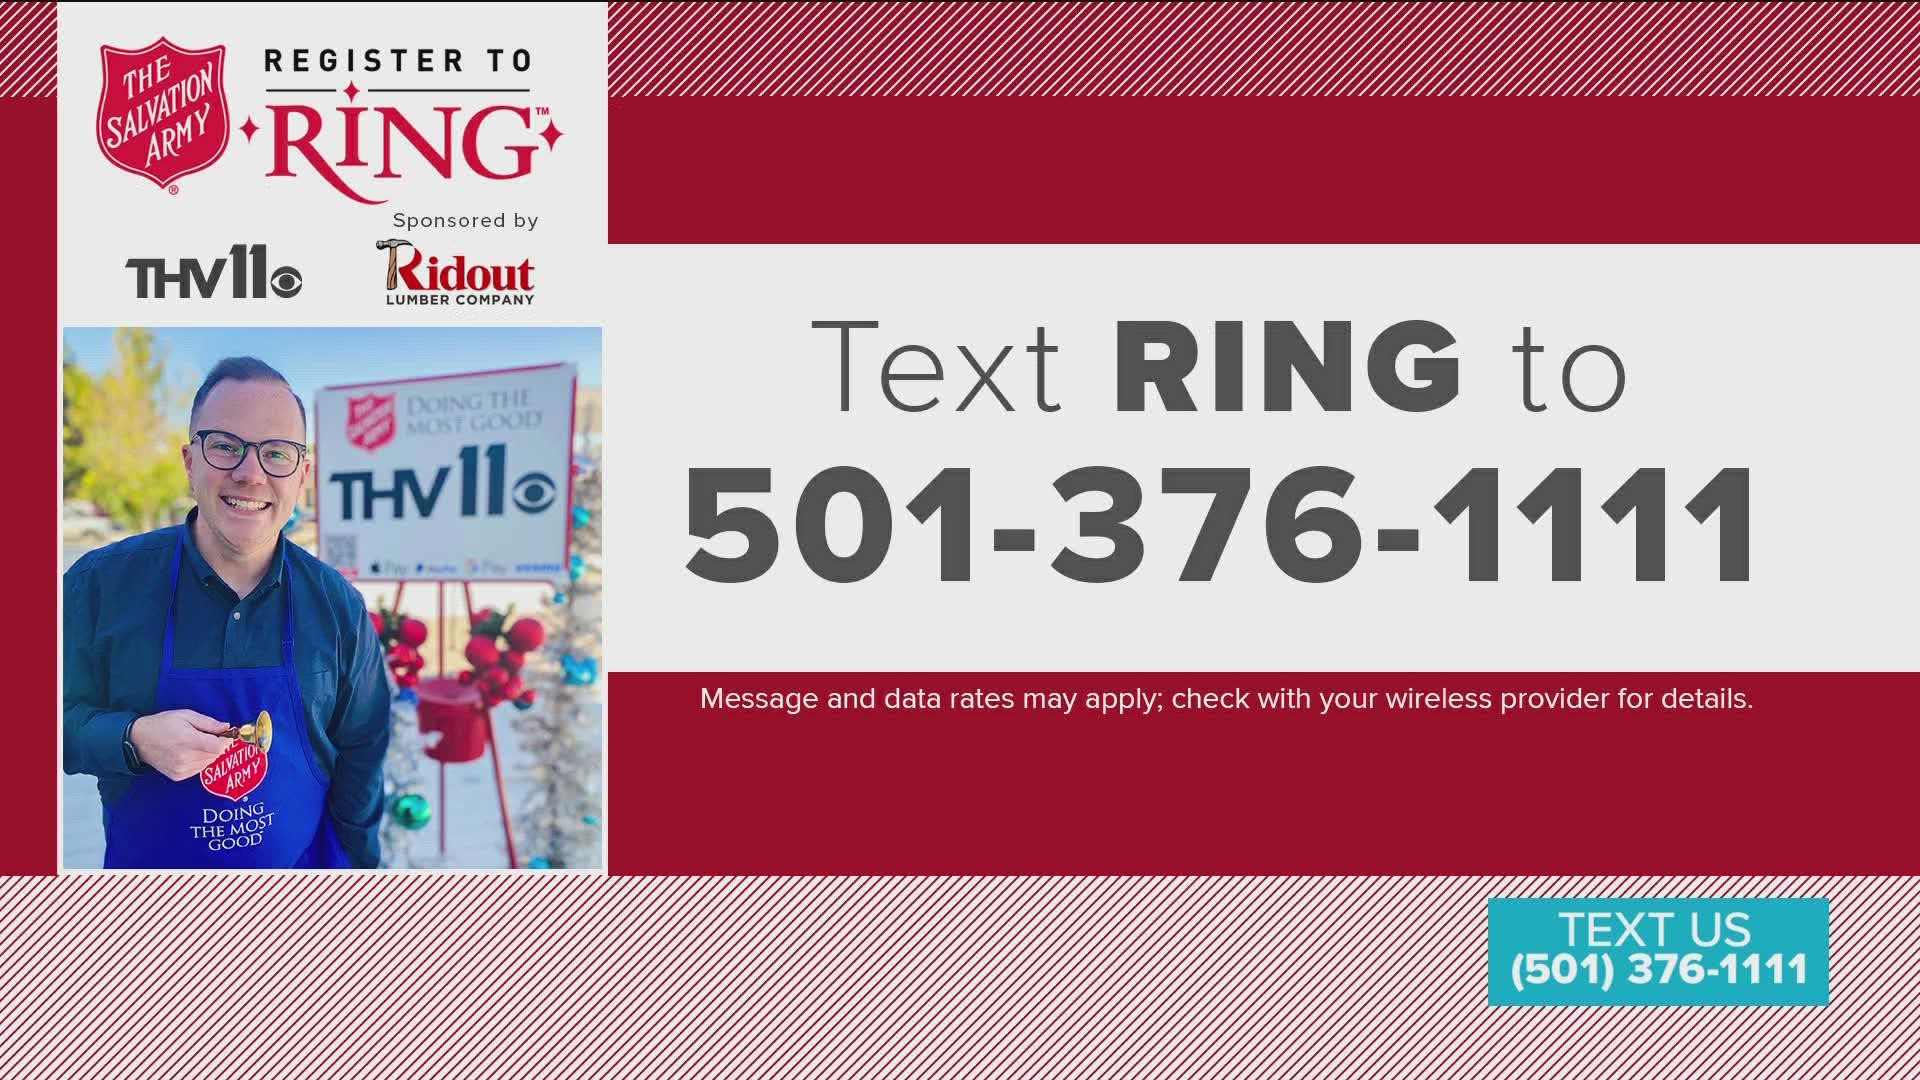 Text "RING" to (501) 376-1111 to learn more!